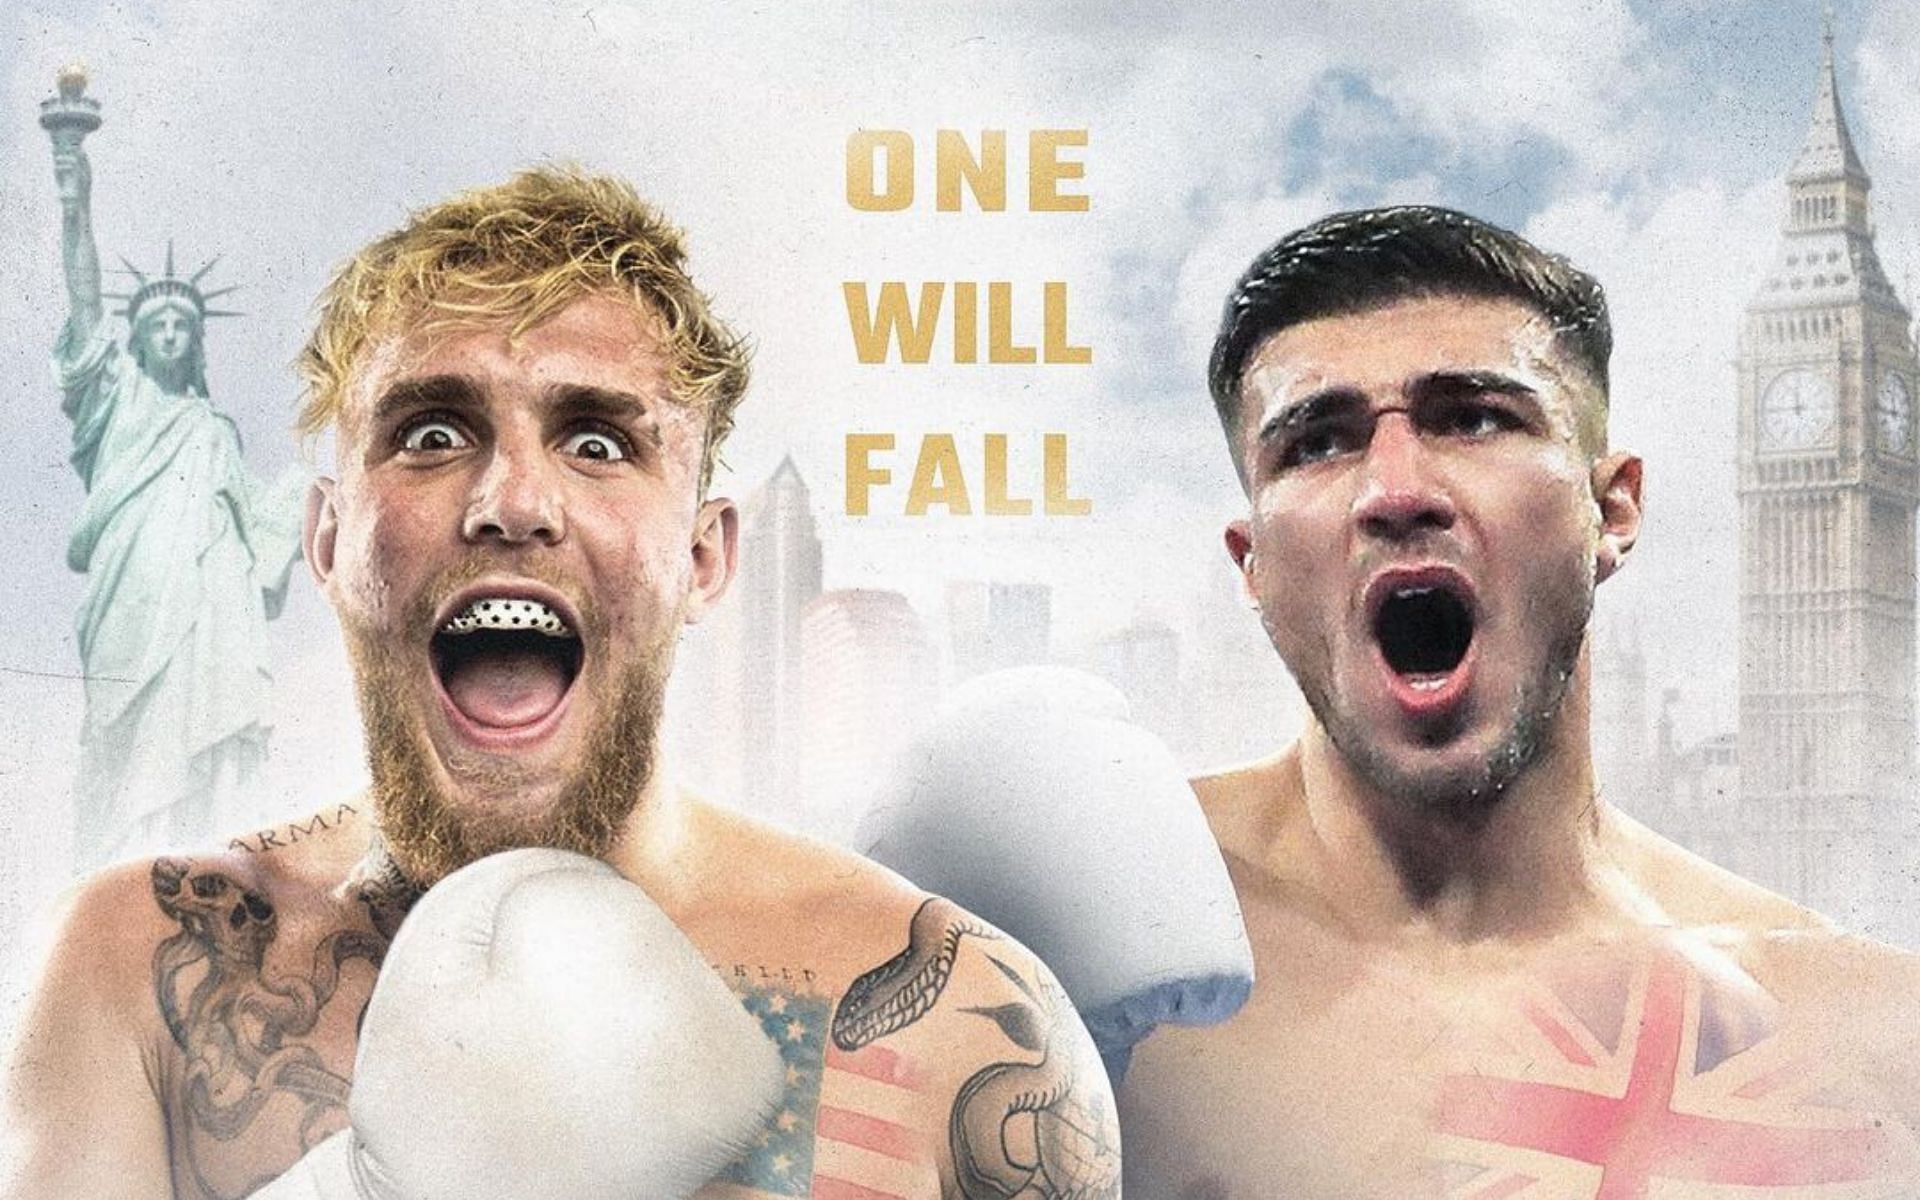 Jake Paul vs. Tommy Fury fight reportedly cancelled